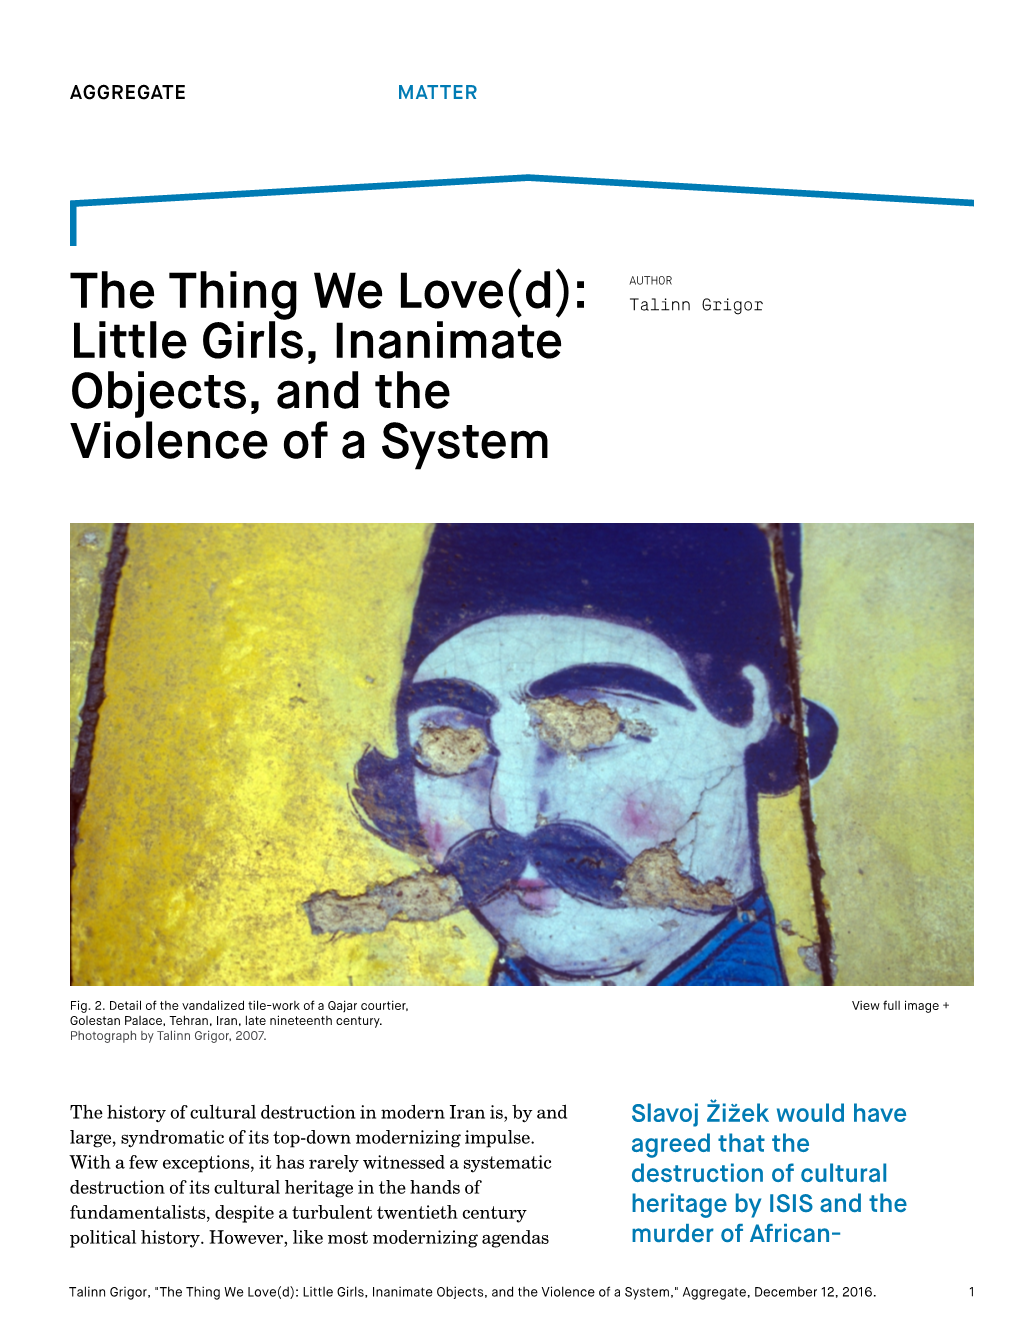 Little Girls, Inanimate Objects, and the Violence of a System